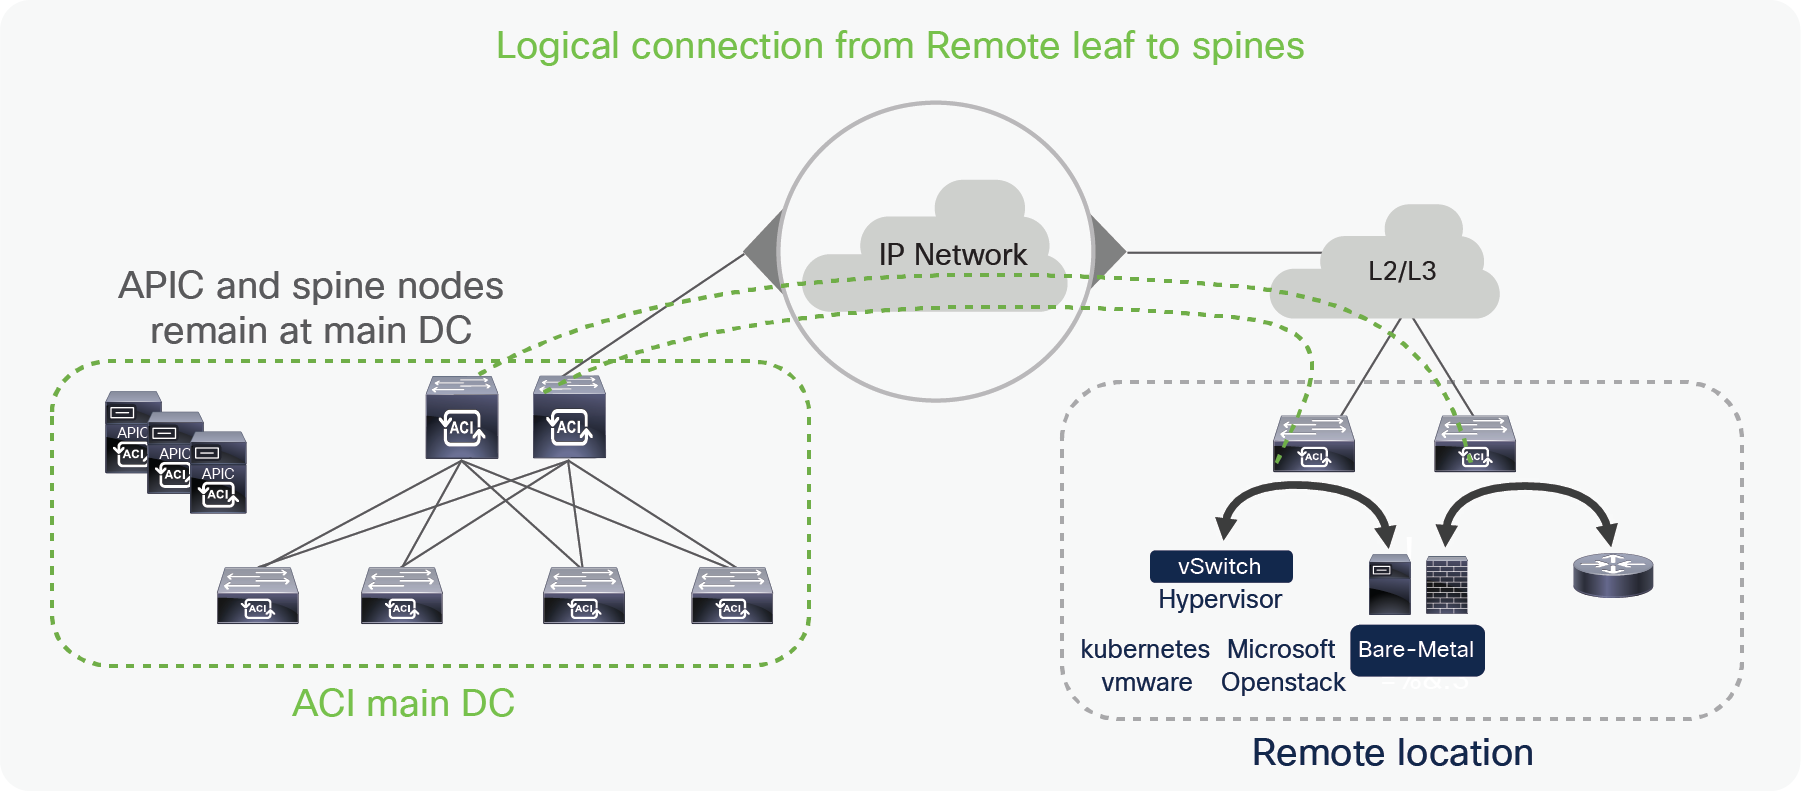 Remote leaf architecture overview